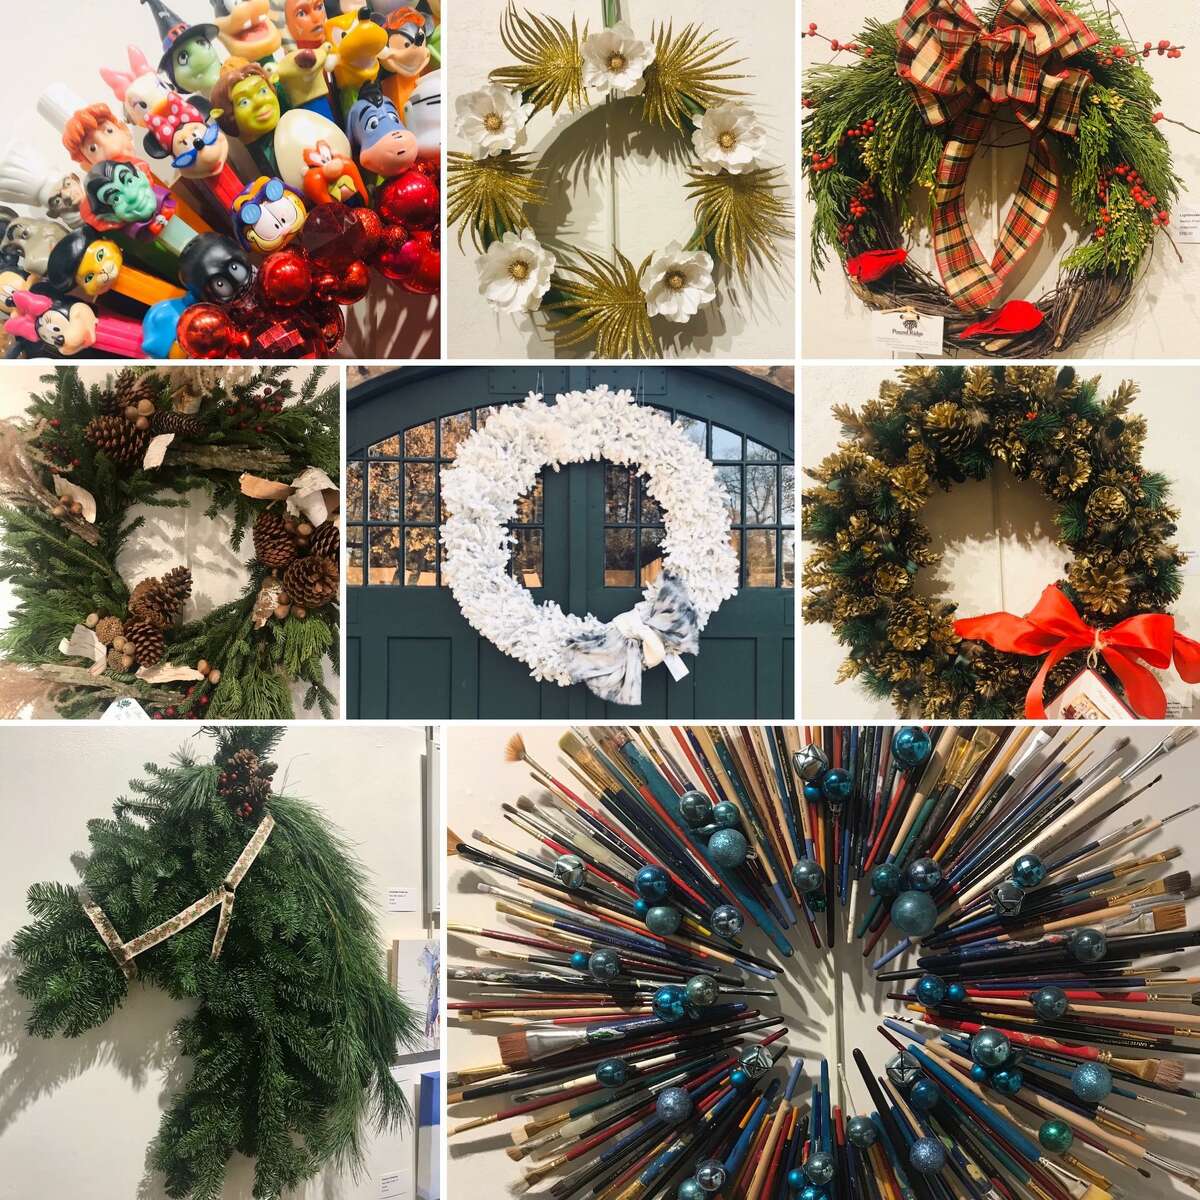 The Carriage Barn Art Center’s 5th annual wreath auction and small works exhibit, Deck The Walls, opens Nov. 29, the first Sunday after Thanksgiving. The exhibit is opening on the same day as the Carriage Barn’s Artists Sunday event.